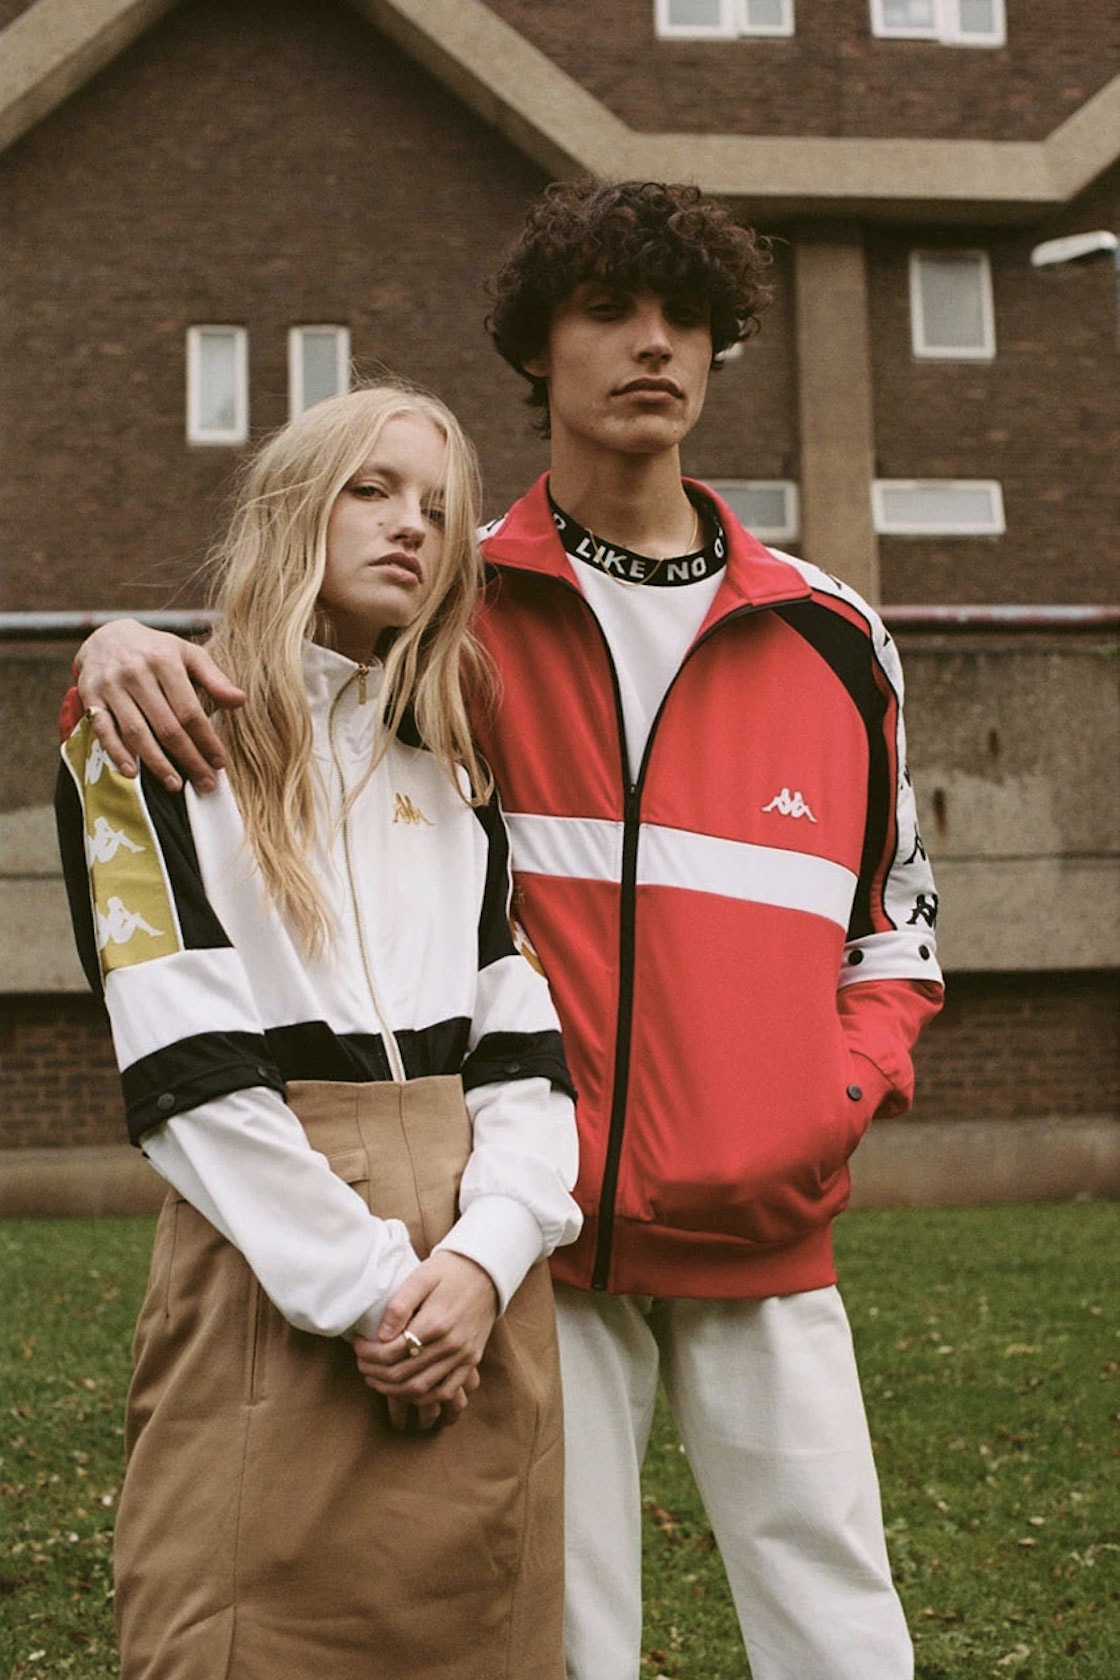 Kappa Spring 2019 Full Lookbook Collection Fashion Retro 70s Inspired Tracksuits